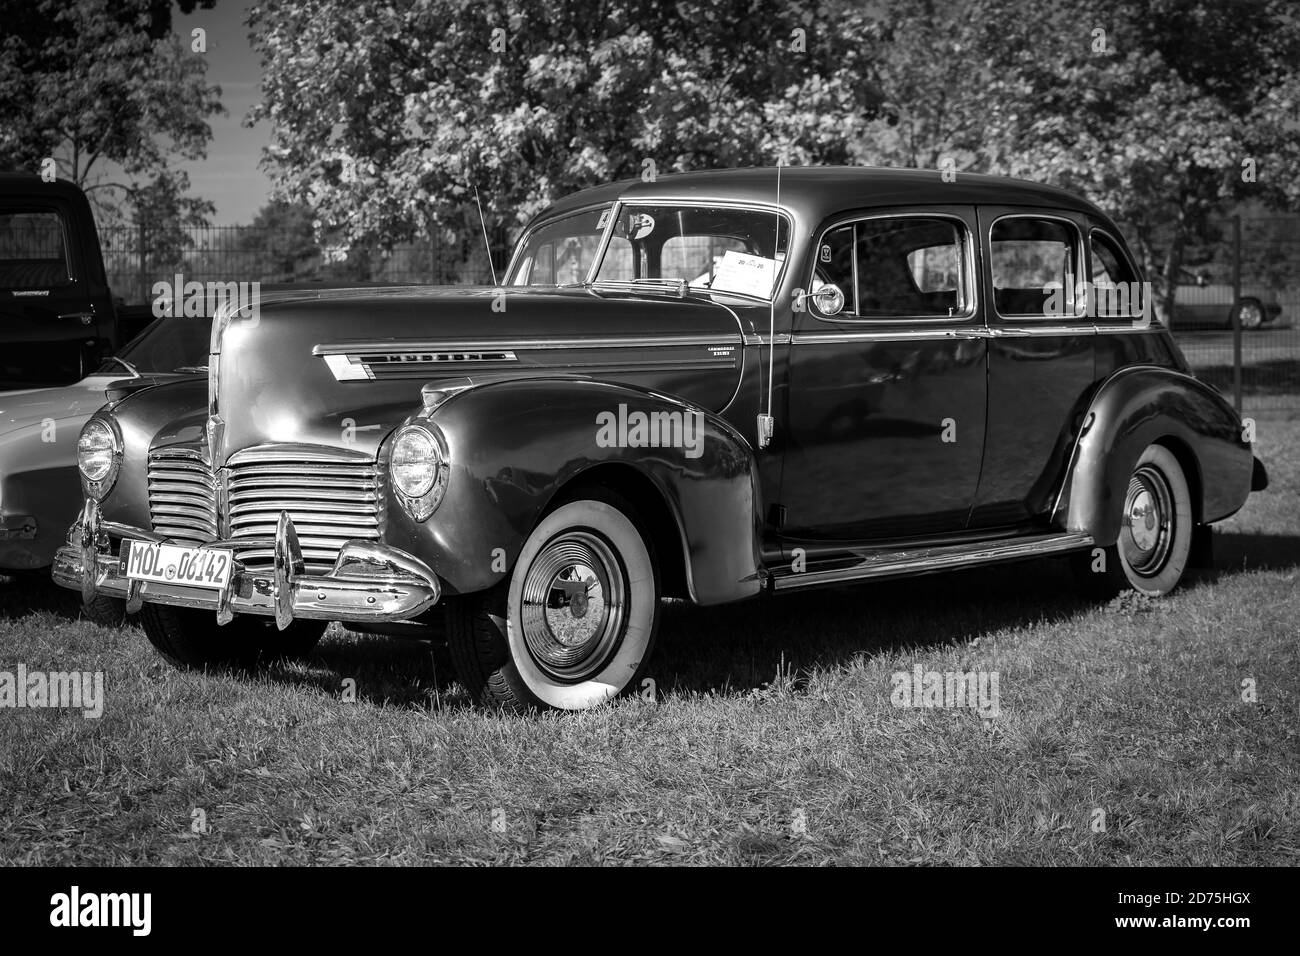 PAAREN IM GLIEN, GERMANY - OCTOBER 03, 2020: Vintage car Hudson Commodore Eight, 1941. Black and white. Die Oldtimer Show 2020. Stock Photo